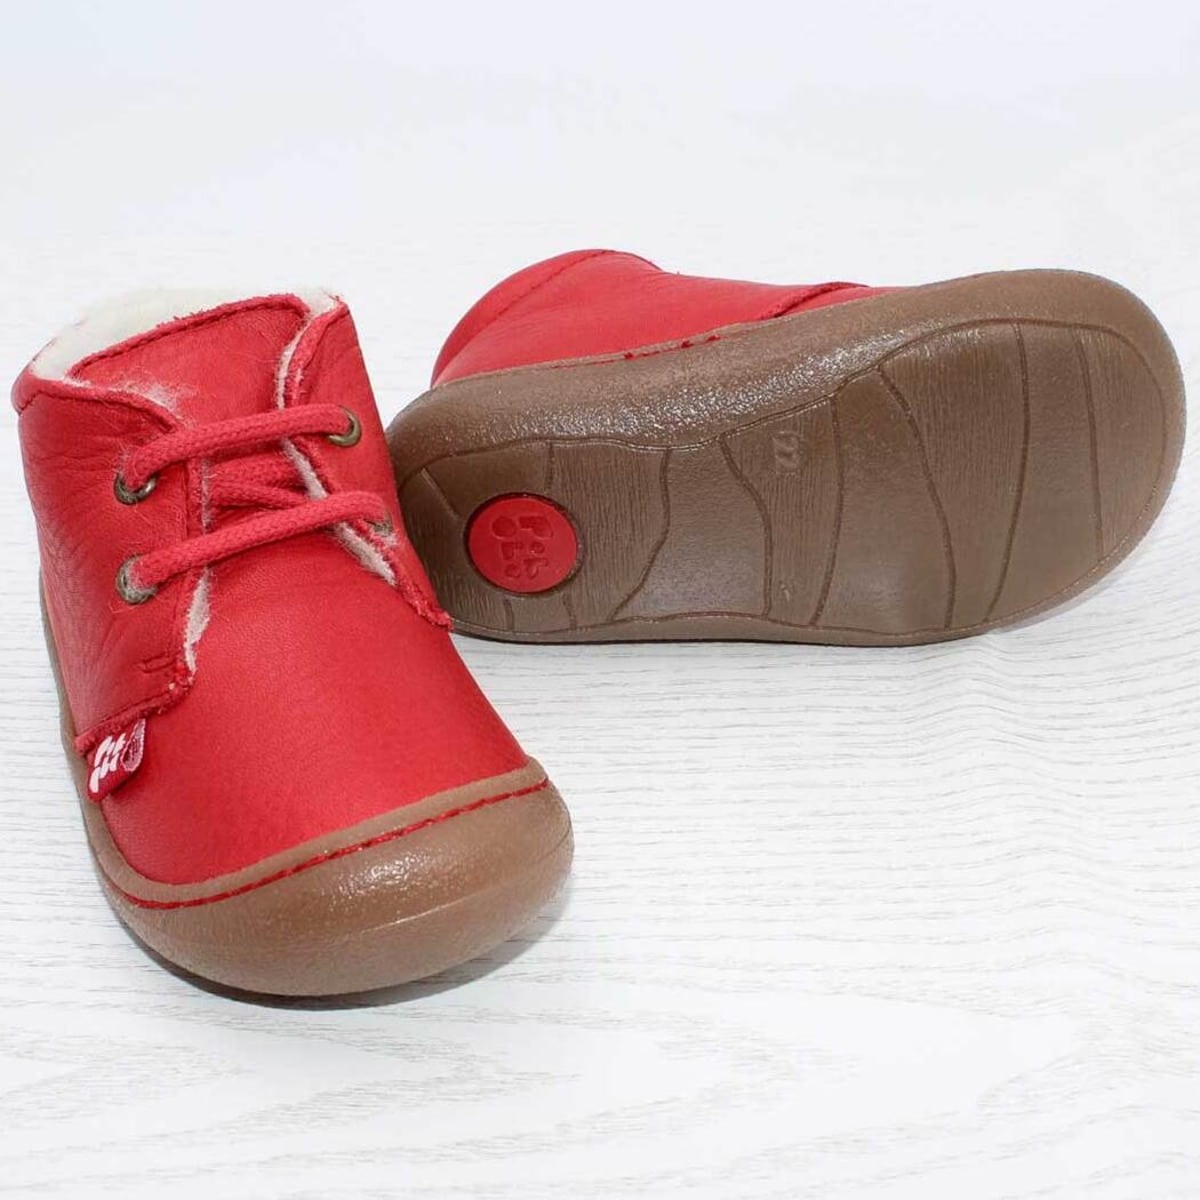 pololo-leather-children's-lace-up-shoes-juan-lined-red-side-sole-1200-1200